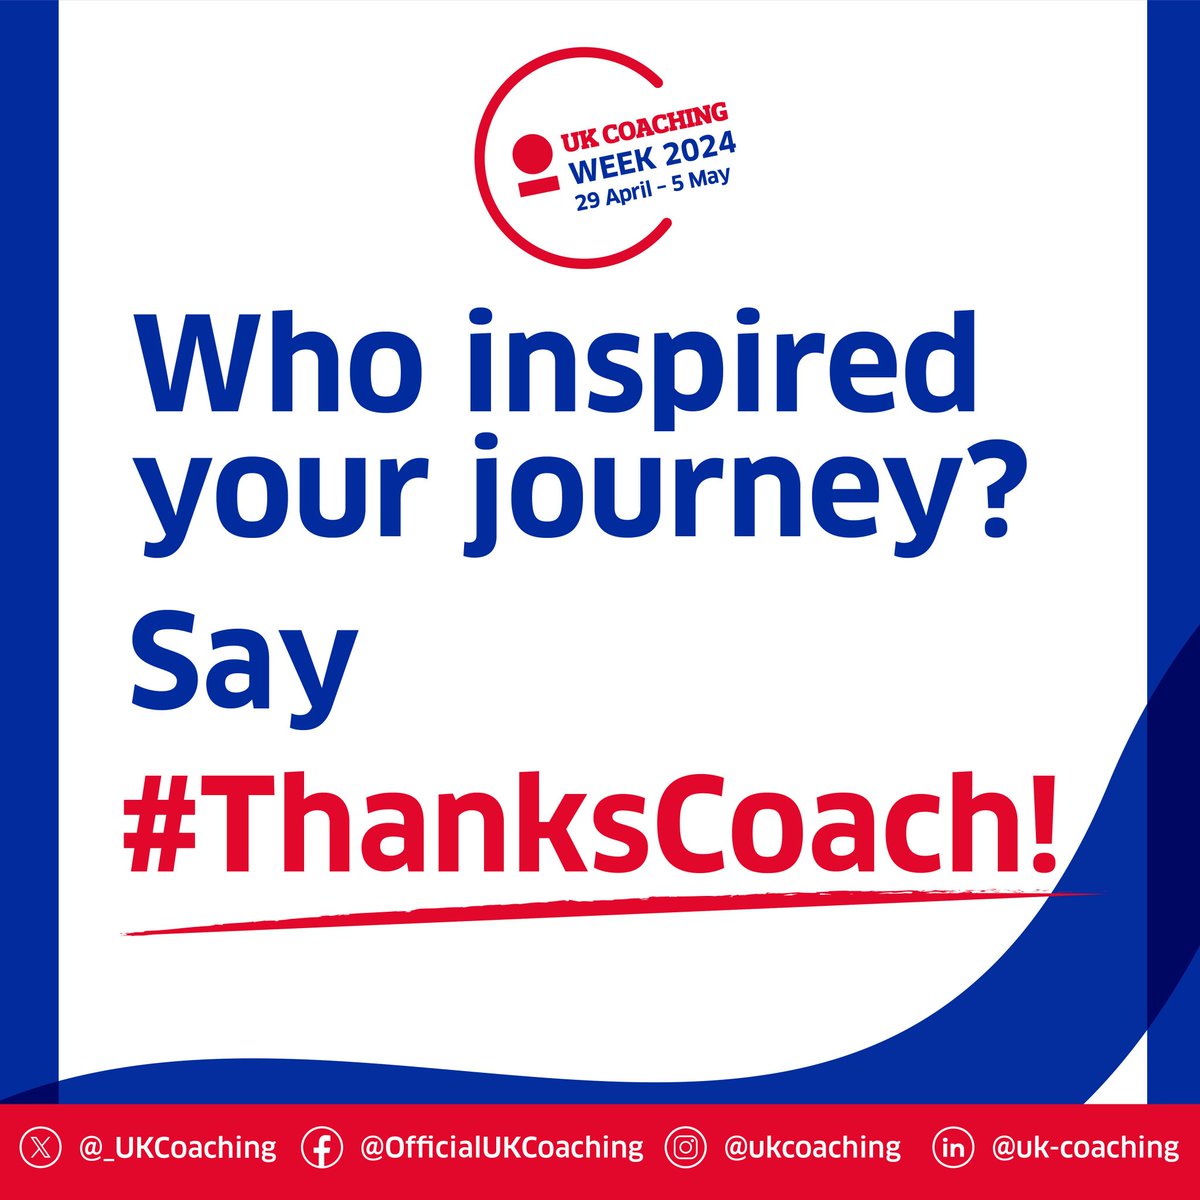 #ThanksCoach I like to say thank you to @FieldingKathryn for encouraging me to be a better athlete and coach. @GoalballUK